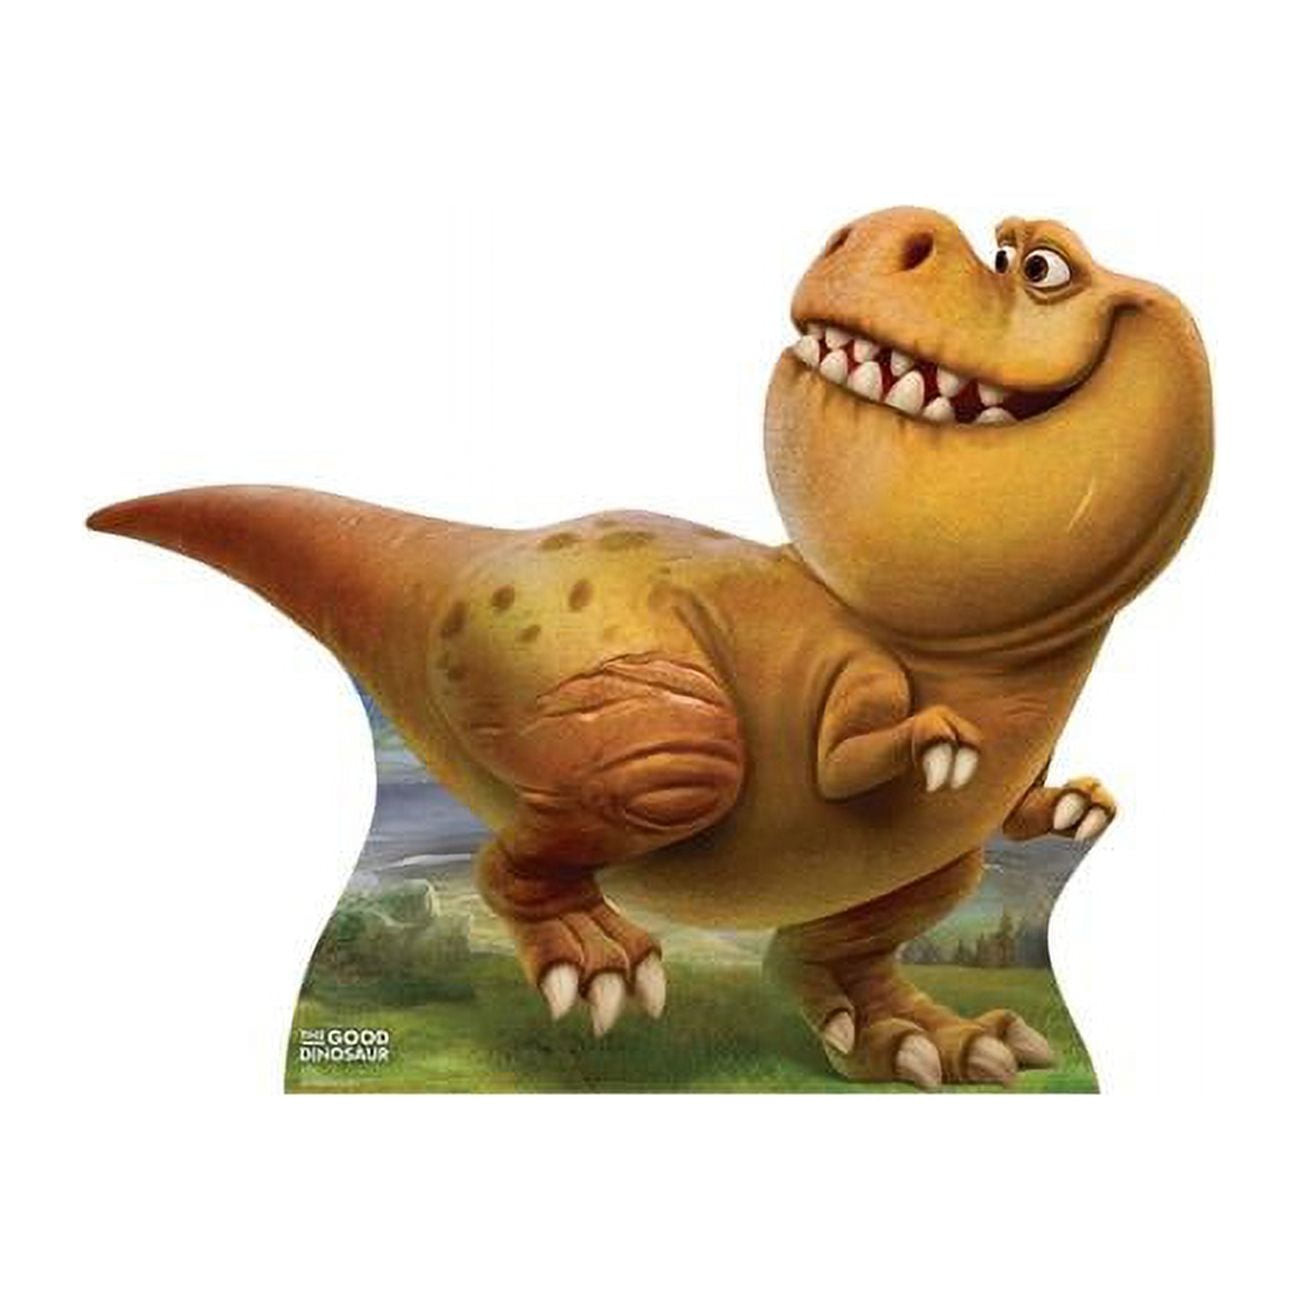 Picture of Advanced Graphics 2054 46 x 58 in. Nash - Disney & Pixars The Good Dinosaur Cardboard Standup